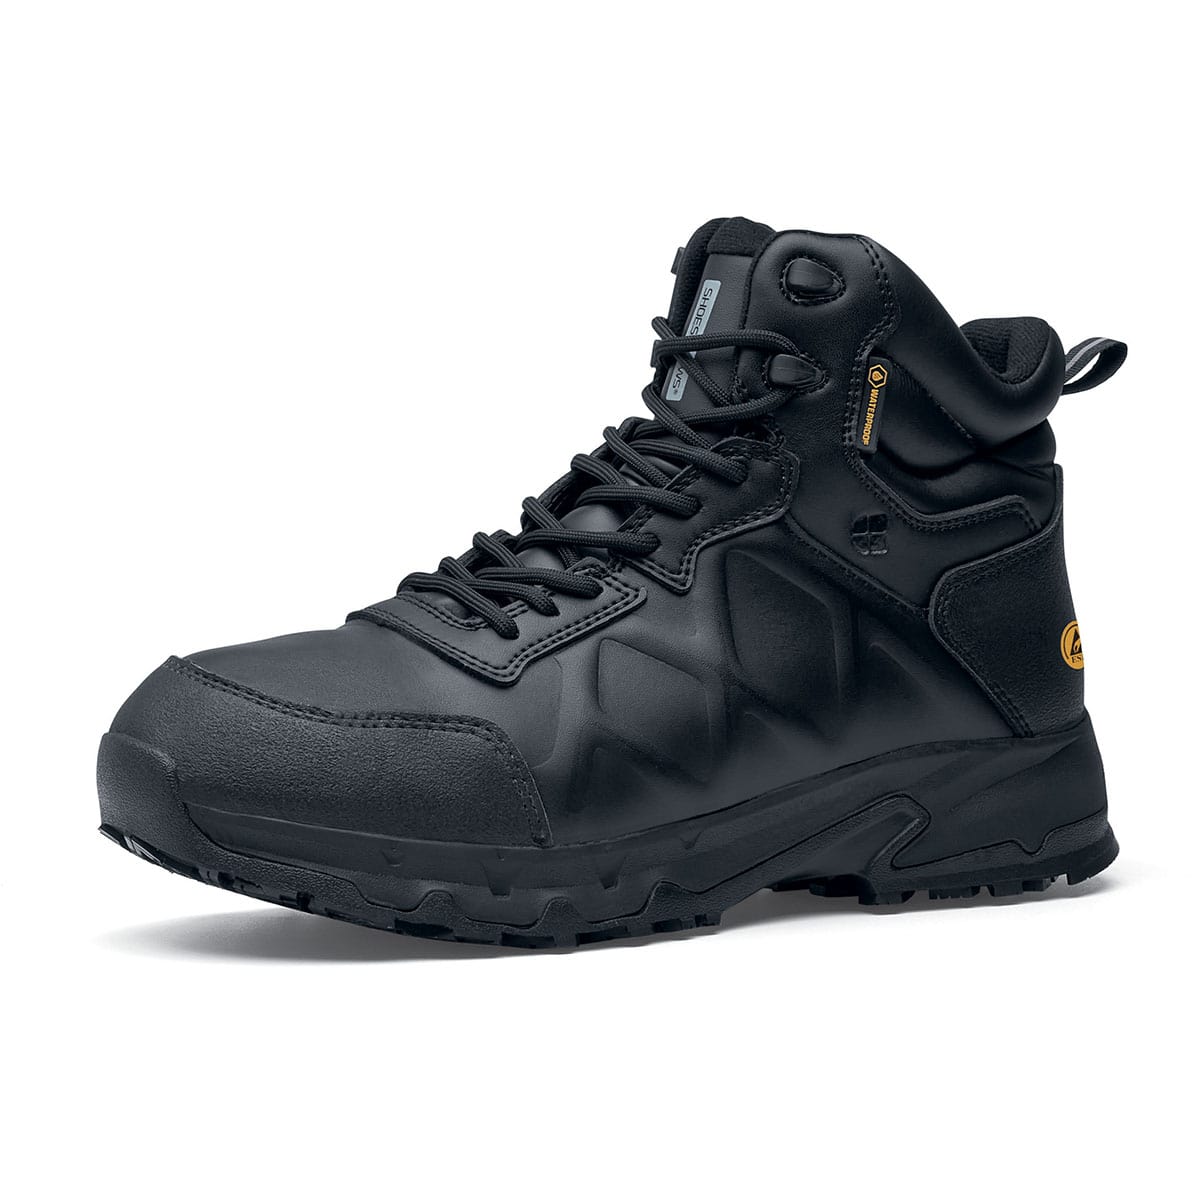 The Callan Mid O2 SRC CI HI ESD safety boot has TripGuard technology, waterproof materials and a durable slip-resistant outsole, seen from the left profile.